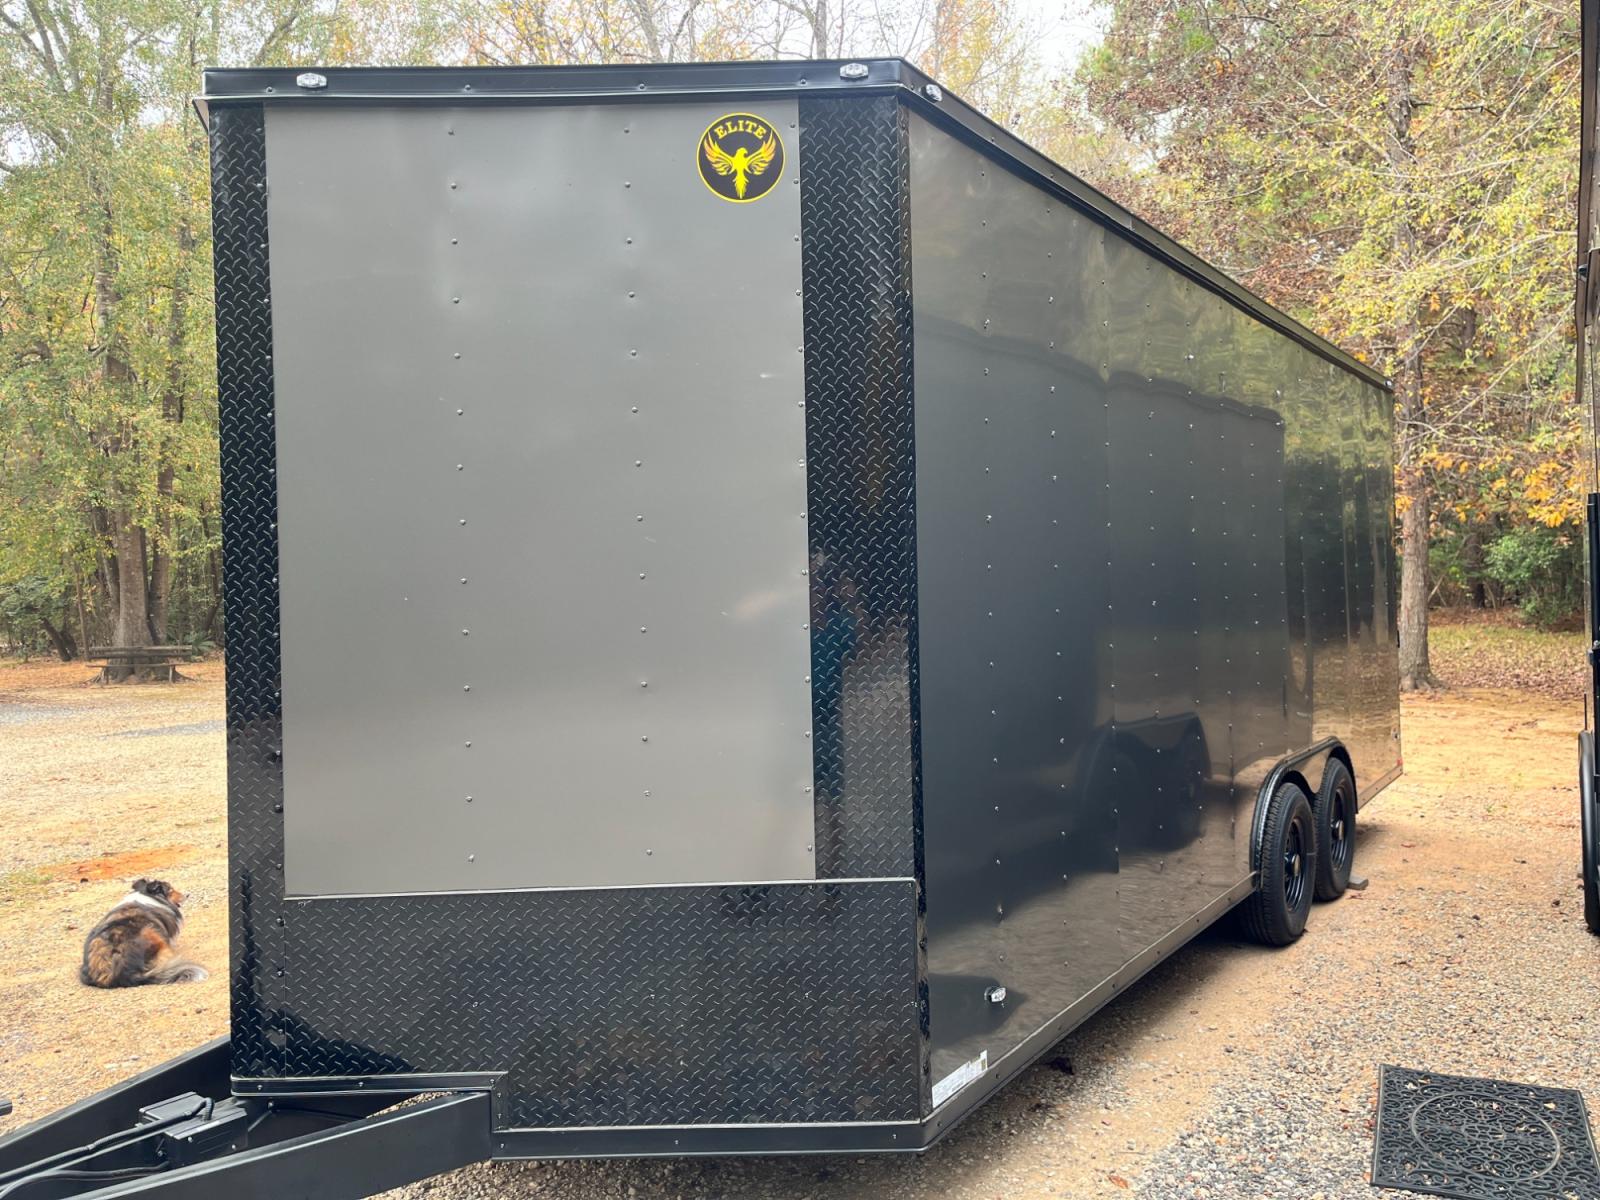 2023 .080 Charcoal Metallic w/Black Out Pkg. Elite Cargo 8.5ft X 20ft Tandem , located at 1330 Rainey Rd., Macon, 31220, (478) 960-1044, 32.845638, -83.778687 - 8.5ft X 20ft Tandem Enclosed Cargo Trailer! Made by Elite Trailers, in Tifton, Ga! This is the Best Quality Trailer Built Today! .080 Thick Charcoal Metallic Skin, with the Black Out Pkg Trim! One Piece Rubber Roof, on top of 7/16" Thick Stable Deck, for a Super Strong Roof! This Roof, Makes i - Photo #10